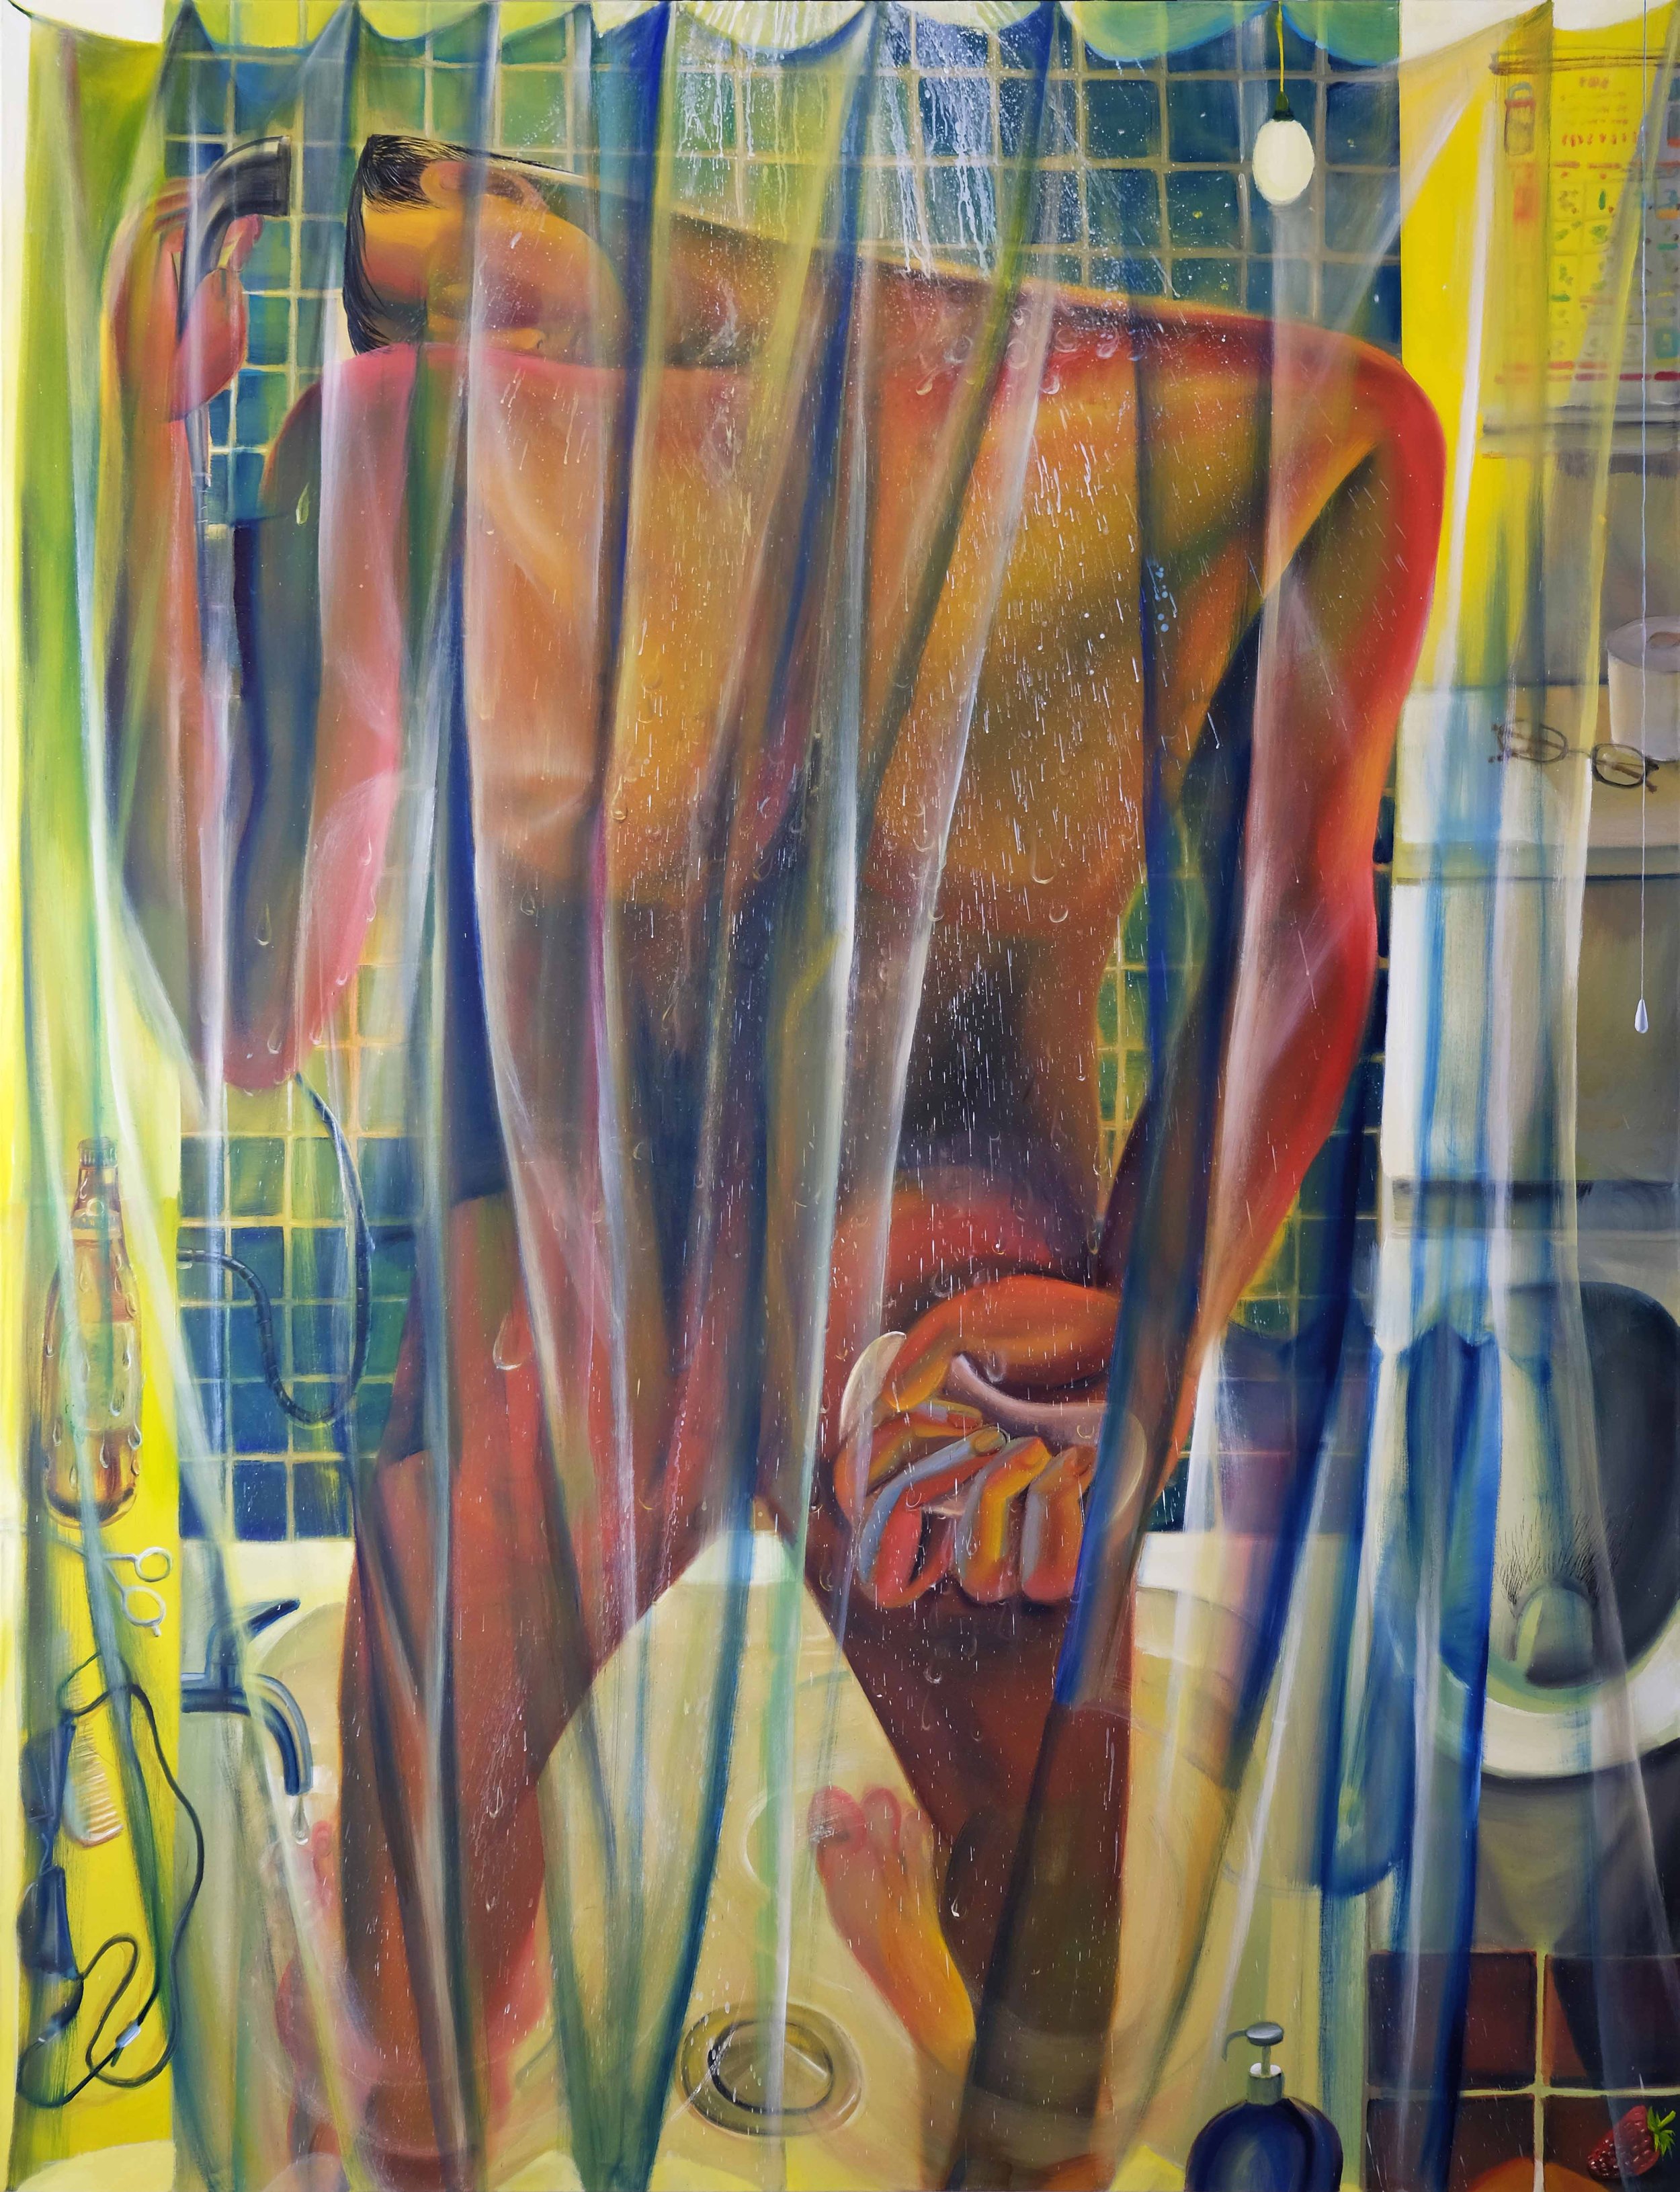   Hotel  (2023) oil on canvas, 200 x 260cm 